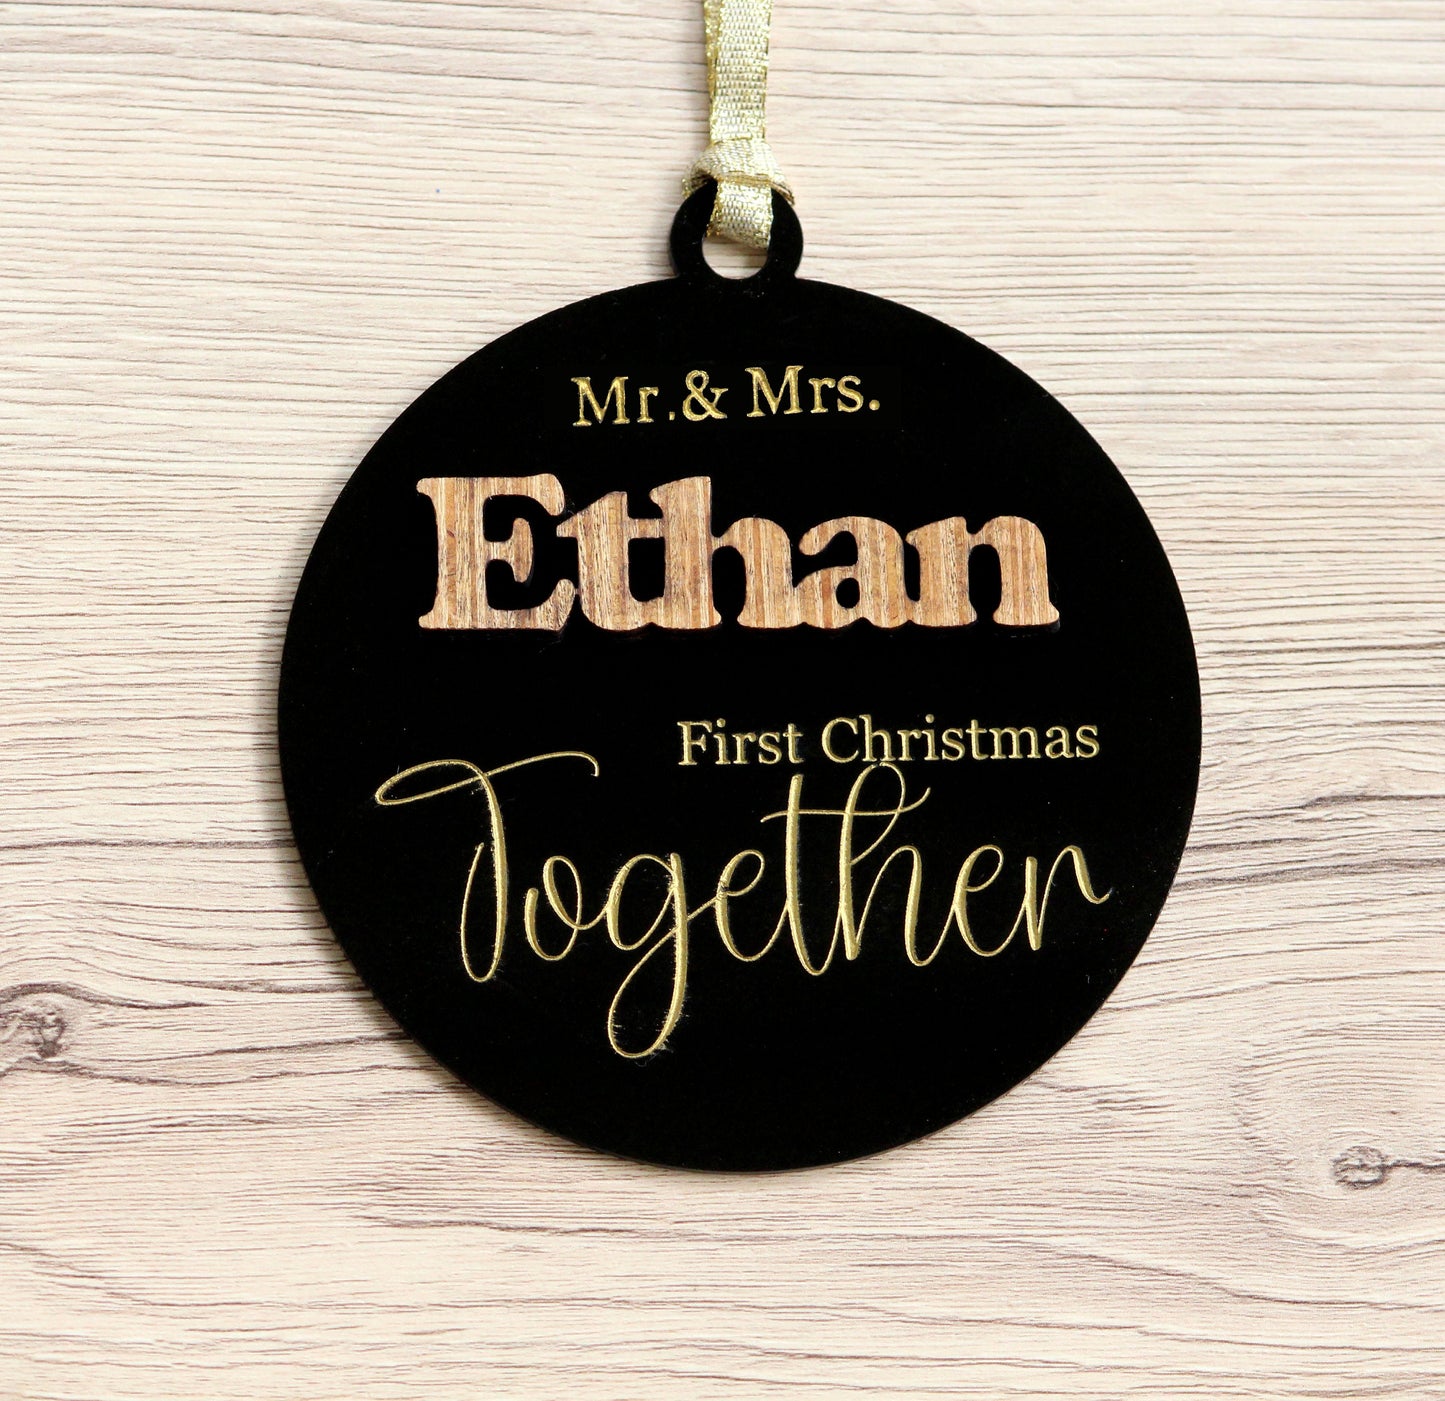 Personalized First Christmas 3D Ornament - Our First Christmas Married as Mr and Mrs Ornament